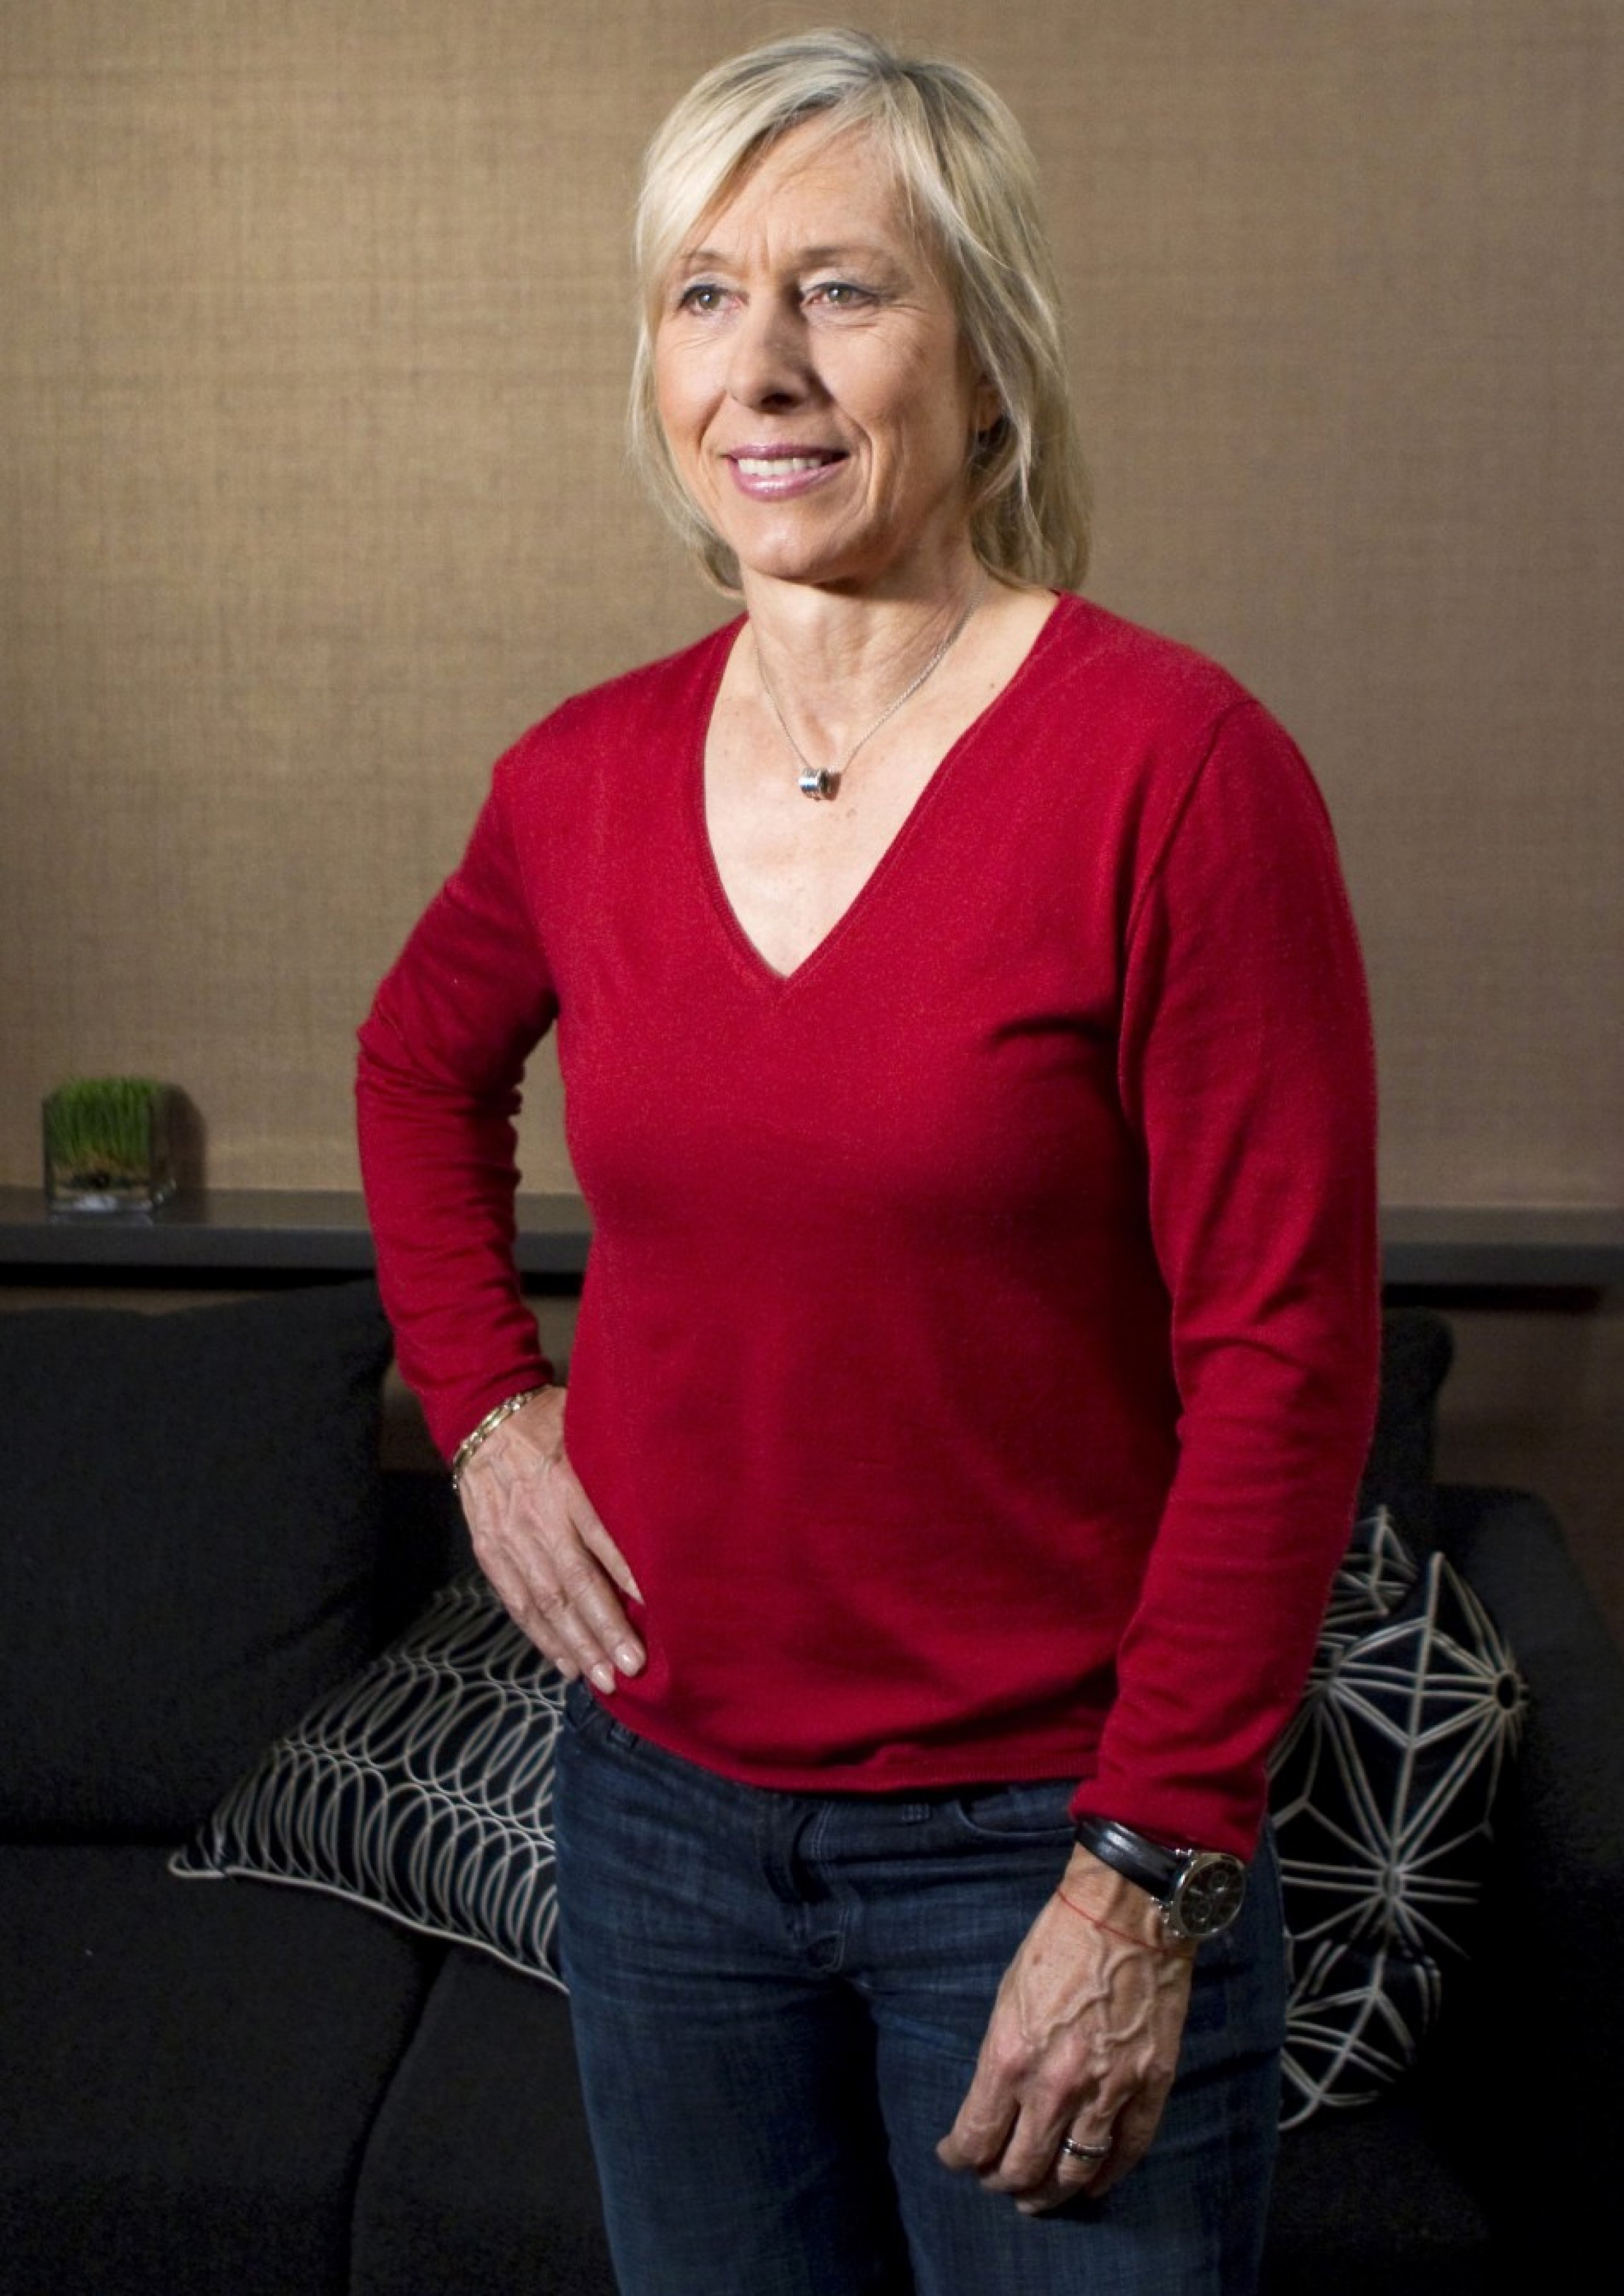 Tennis legend Martina Navratilova poses for a portrait in New York April 7, 2010. Navratilova has been diagnosed with breast cancer, she has told U.S. online magazine People. She was diagnosed with a non-invasive form of breast cancer.